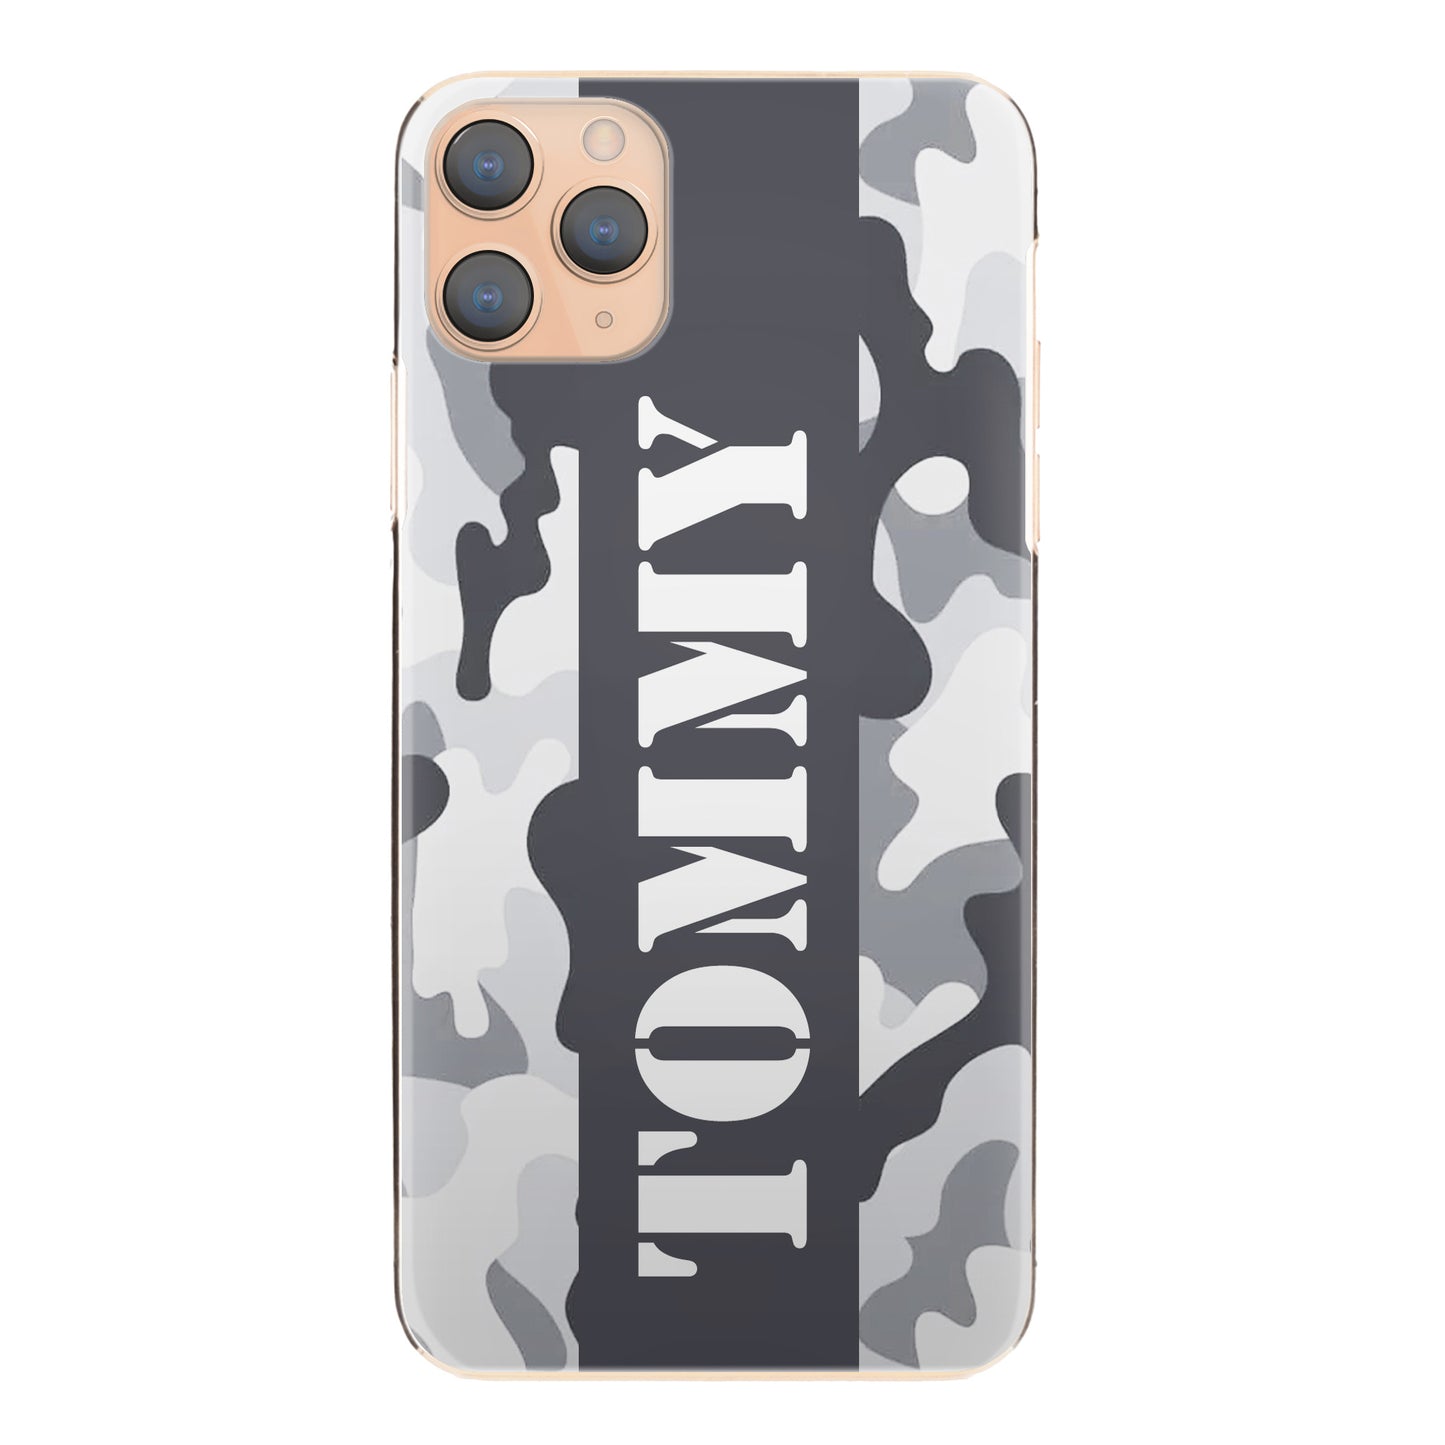 Personalised HTC Phone Hard Case with Military Text on Artic Camo